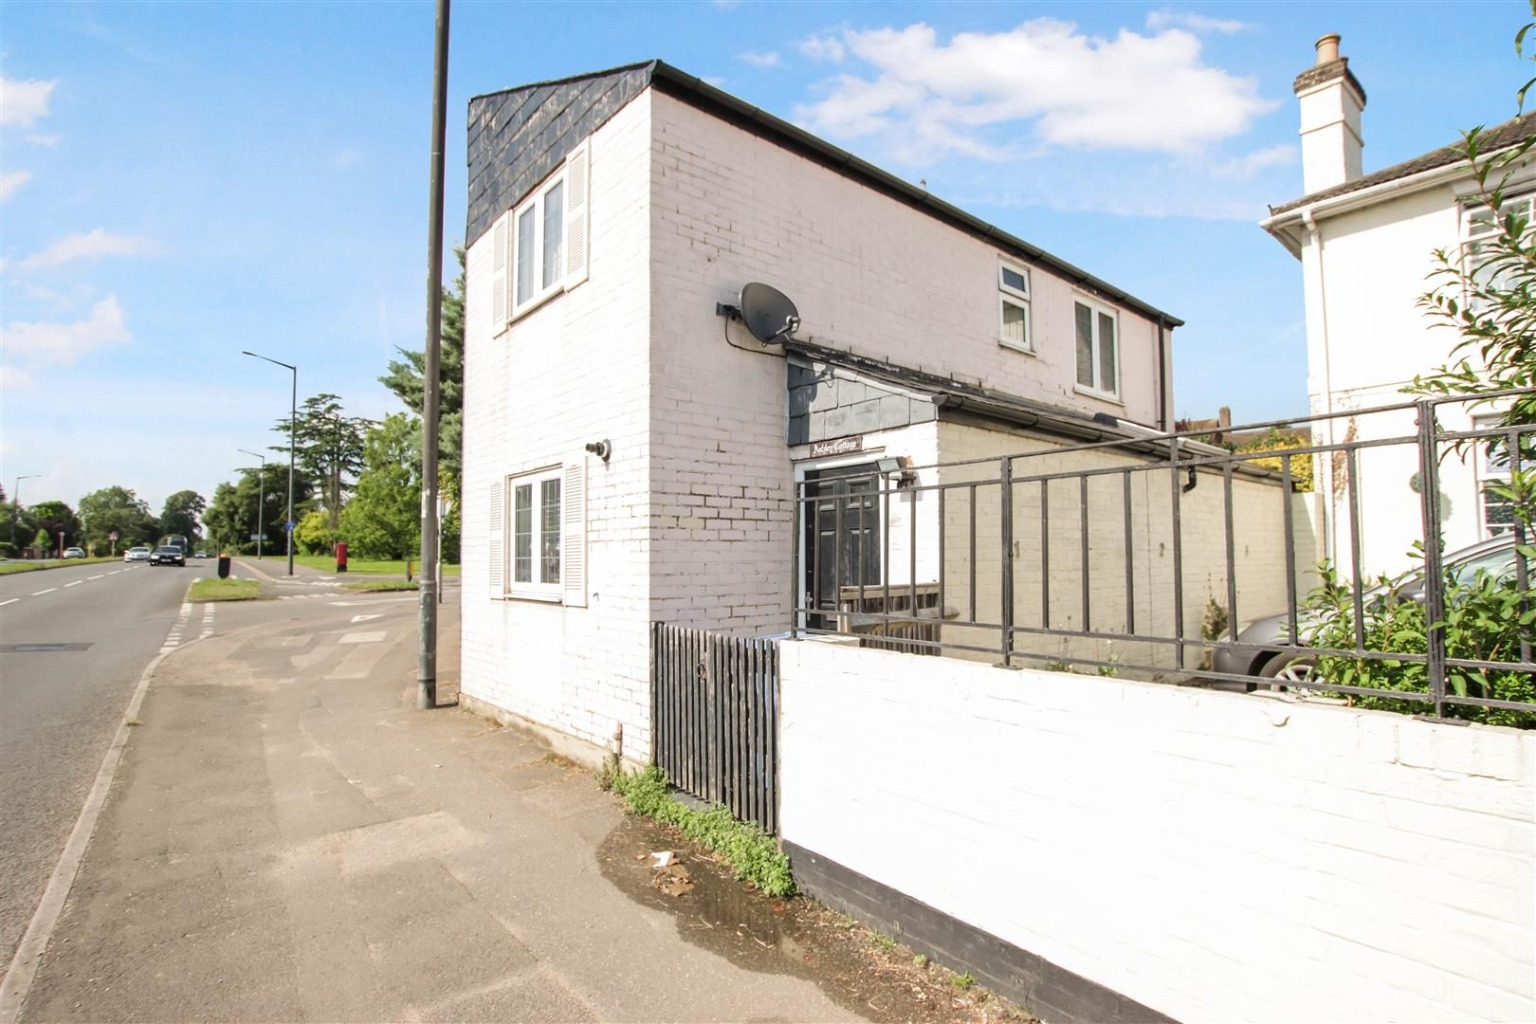 This property would be perfect for a couple or even a small family, the kitchen has plenty of space for modern appliances and worktop space to really show off your culinary skills.